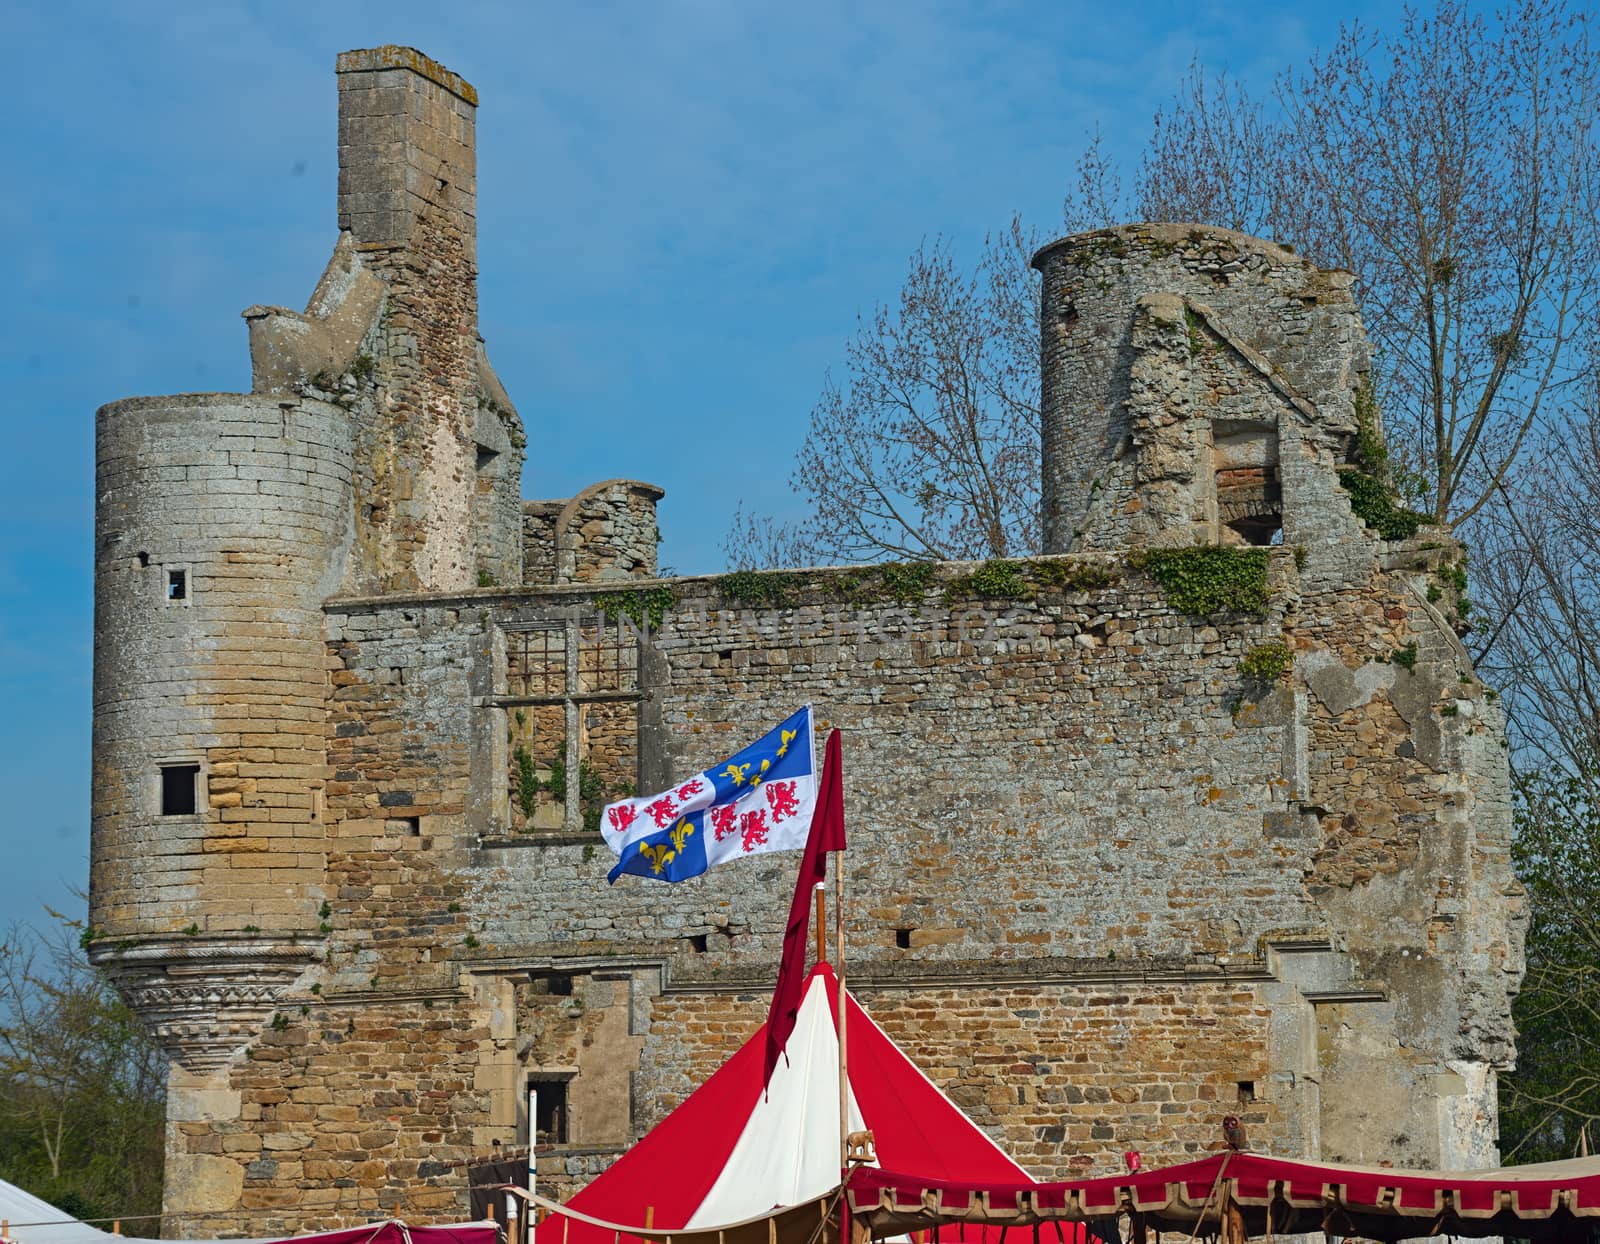 Top of medieval red and white tent with normandy flag at top and castle in background